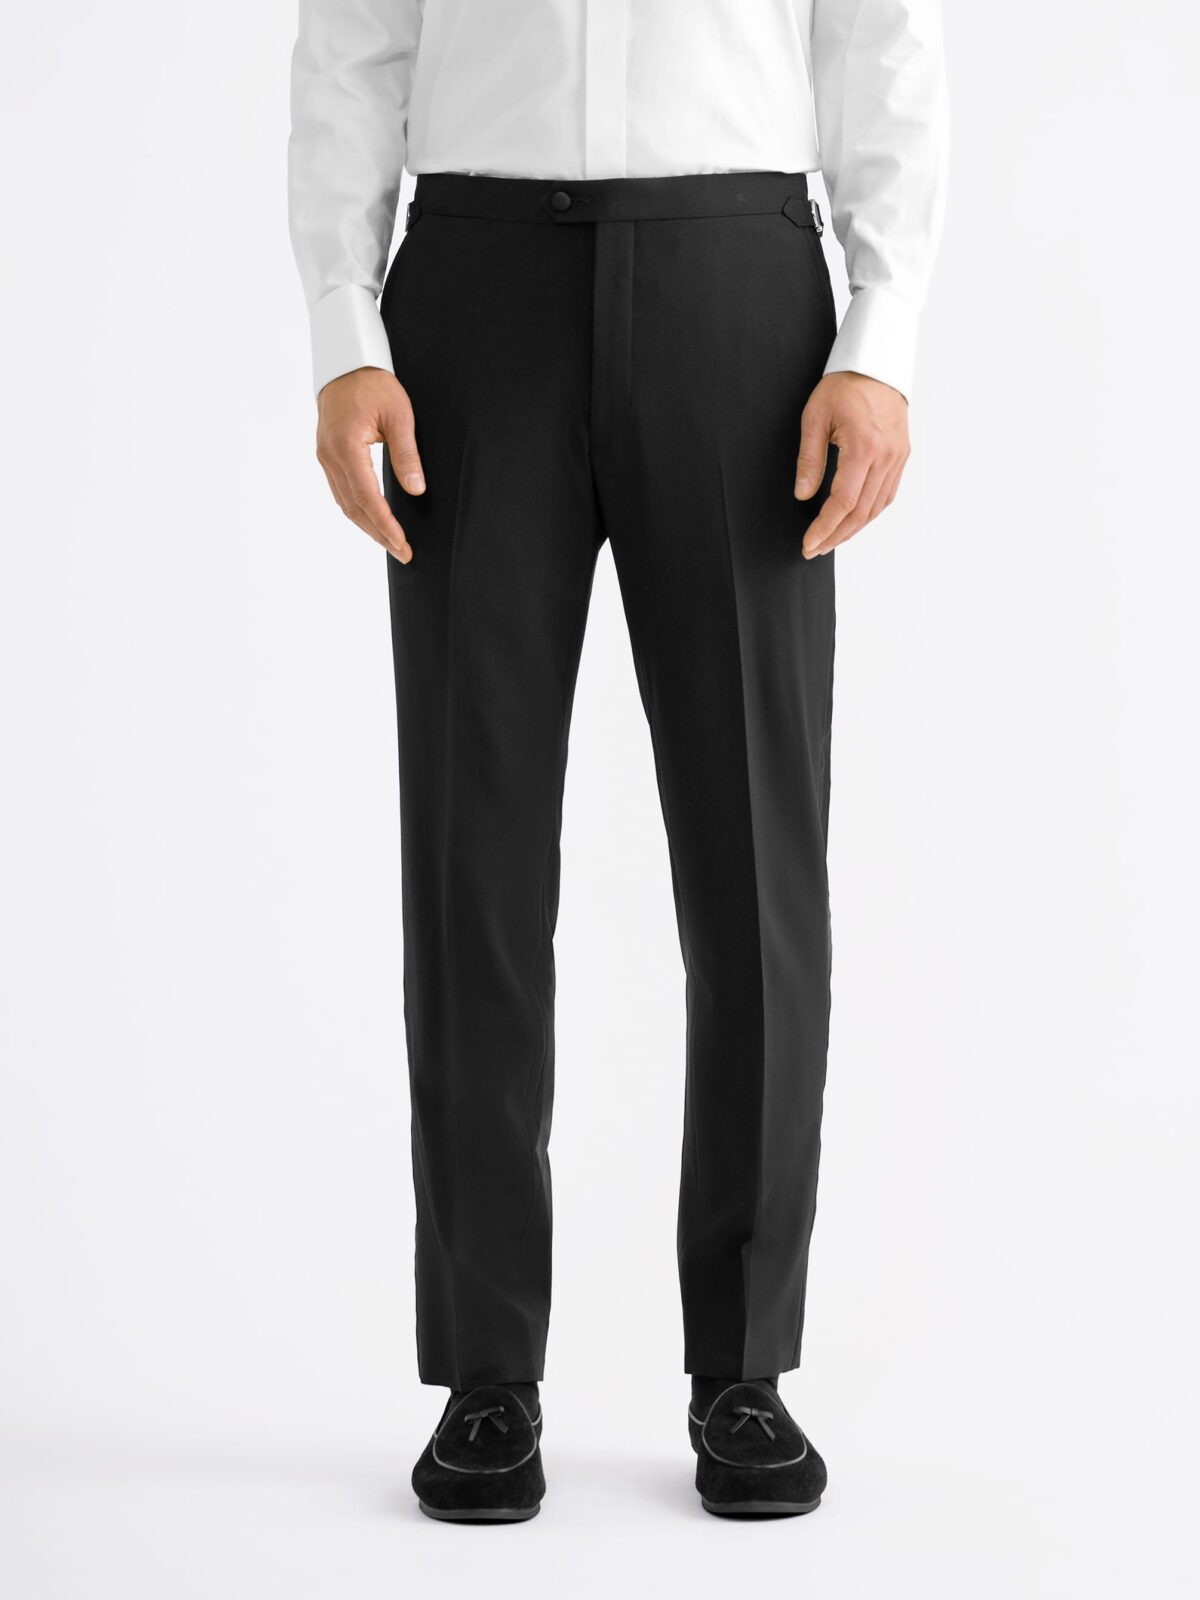 Black Stretch Wool Tuxedo Pant - Custom Fit Tailored Clothing